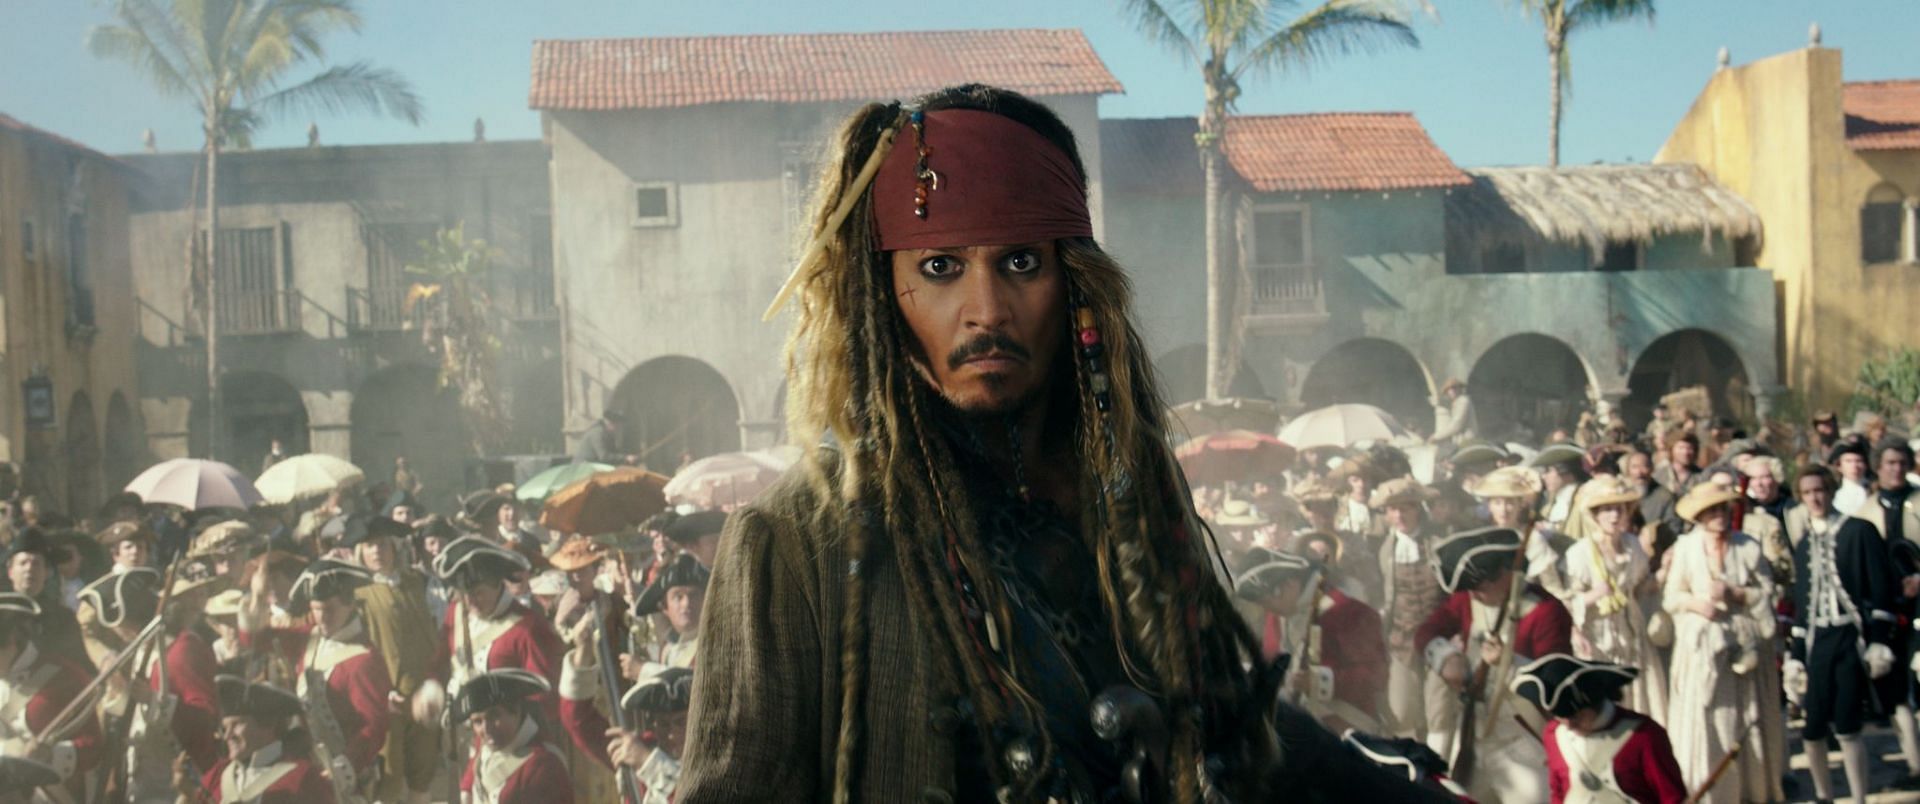 A still from Pirates of the Caribbean: Dead Men Tell No Tales (Image via Disney Plus)